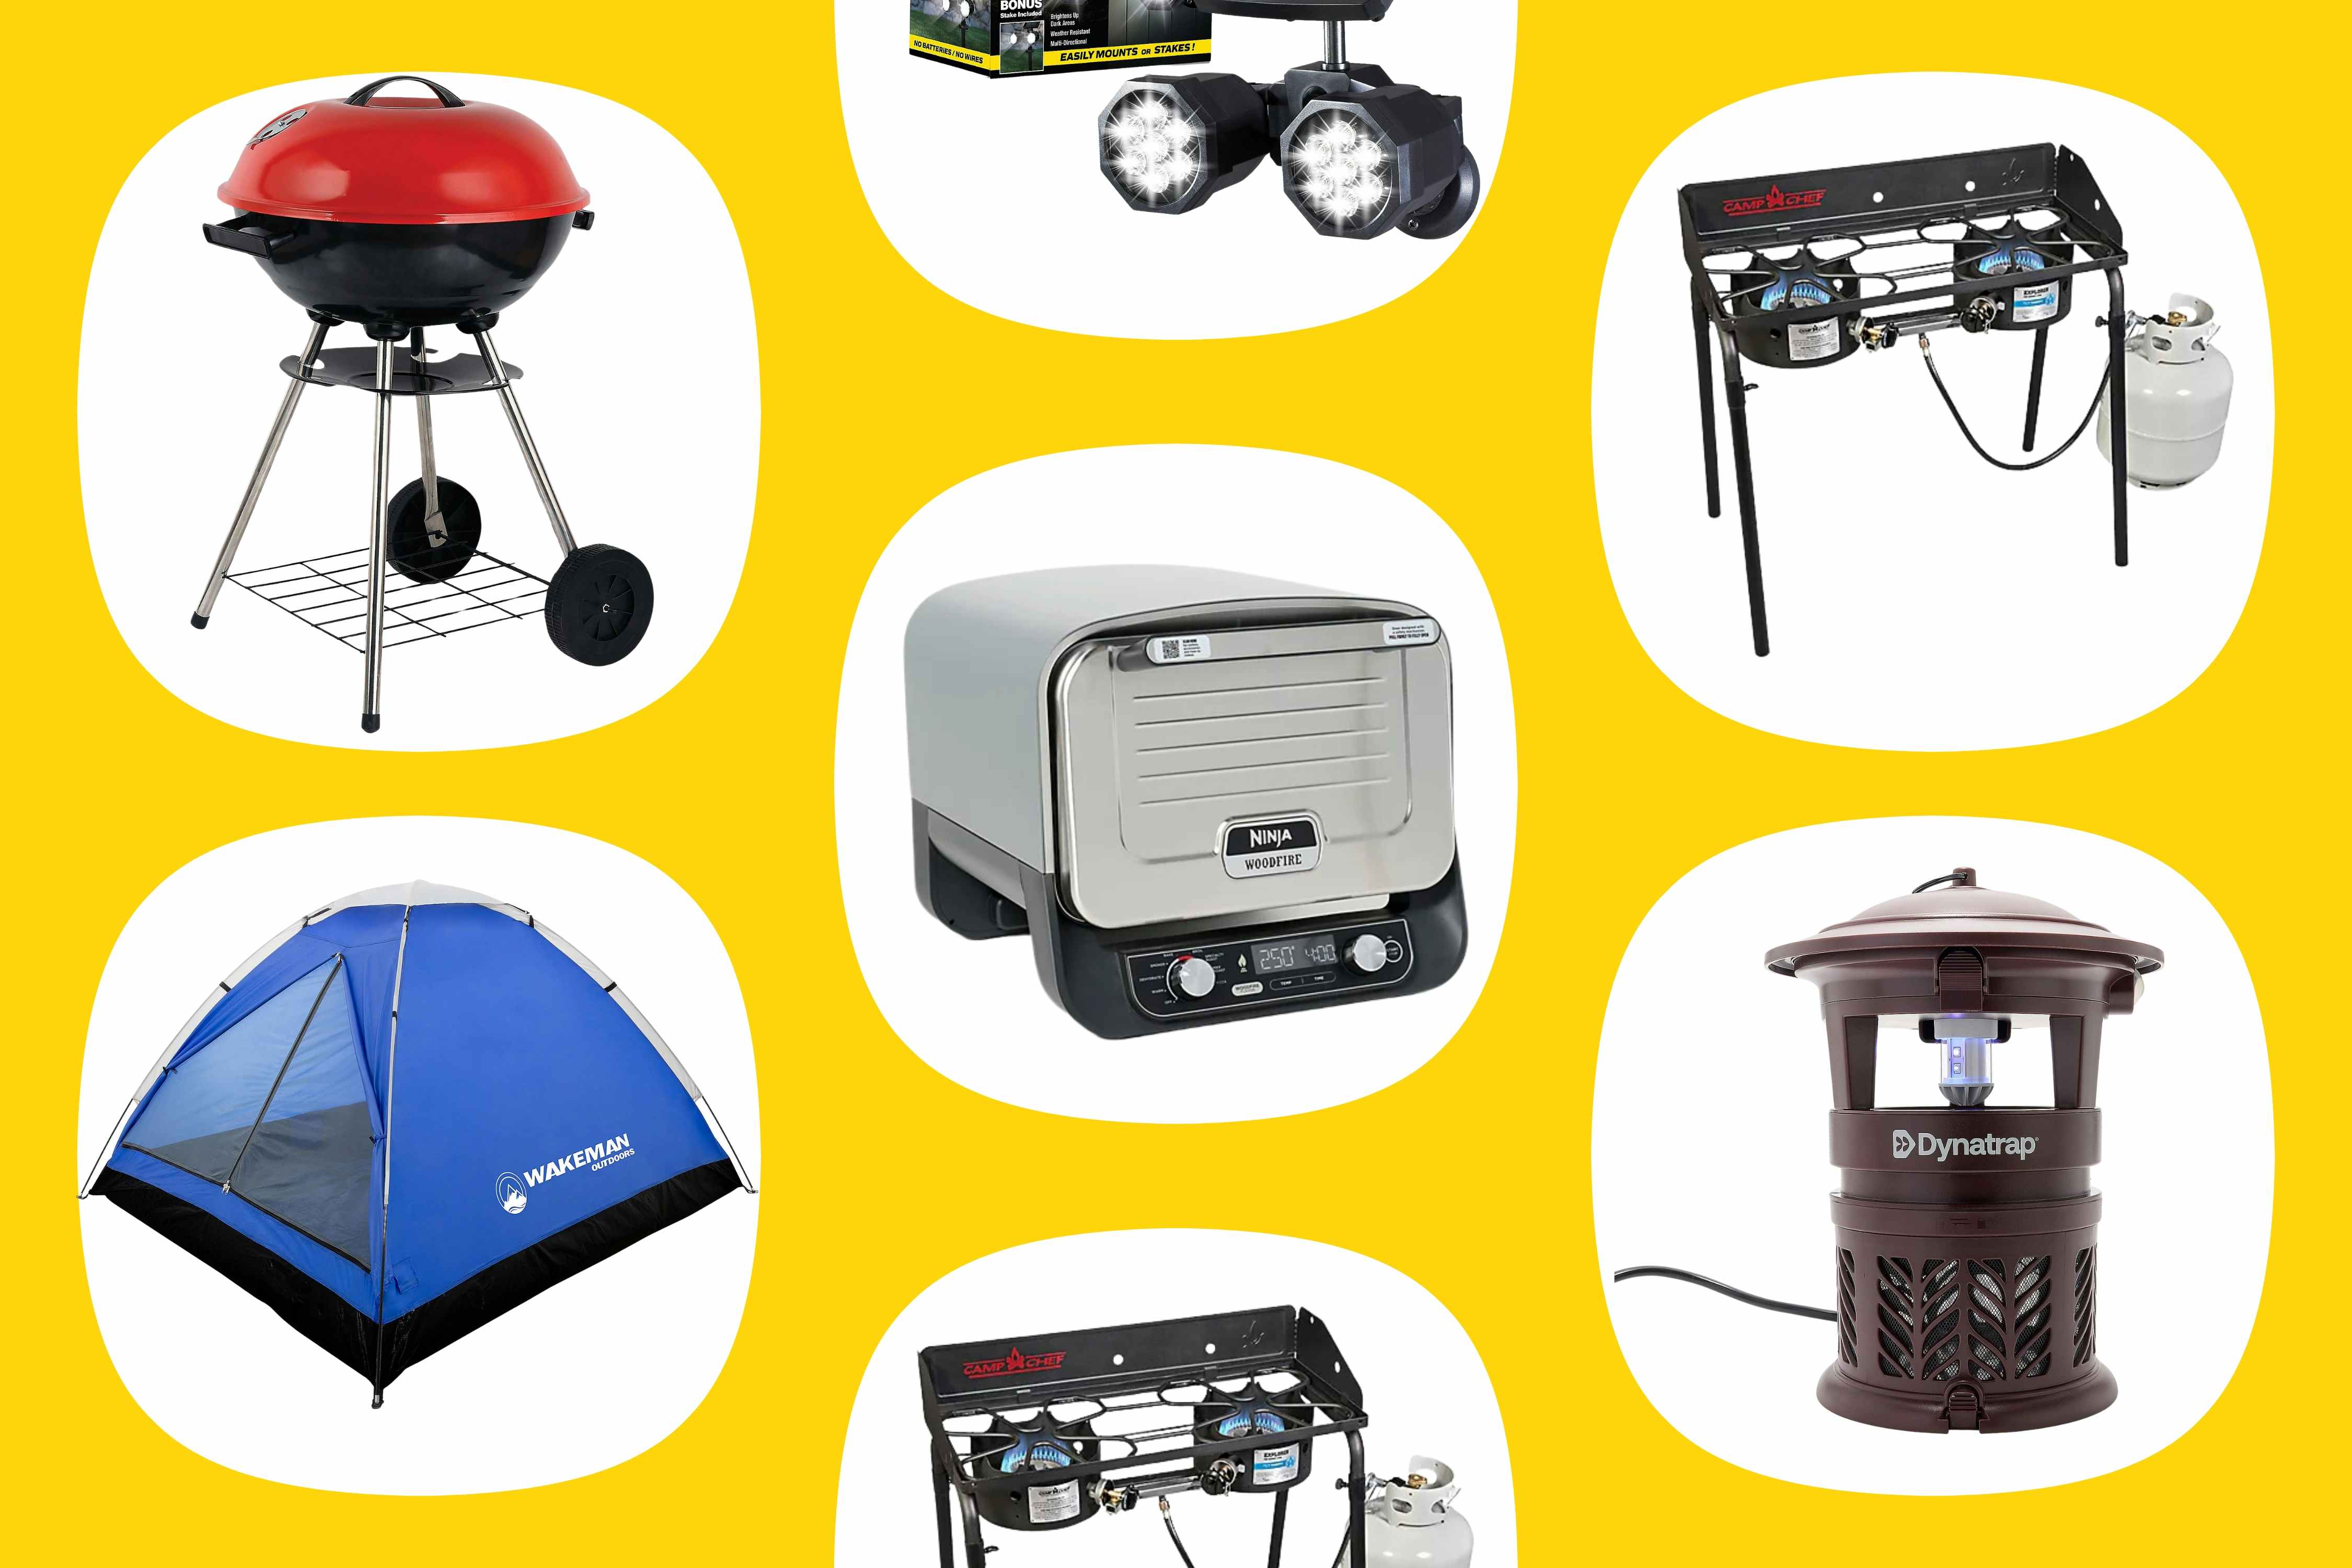 Grab Your Camping Essentials: $56 Grill, $30 Tent, and More